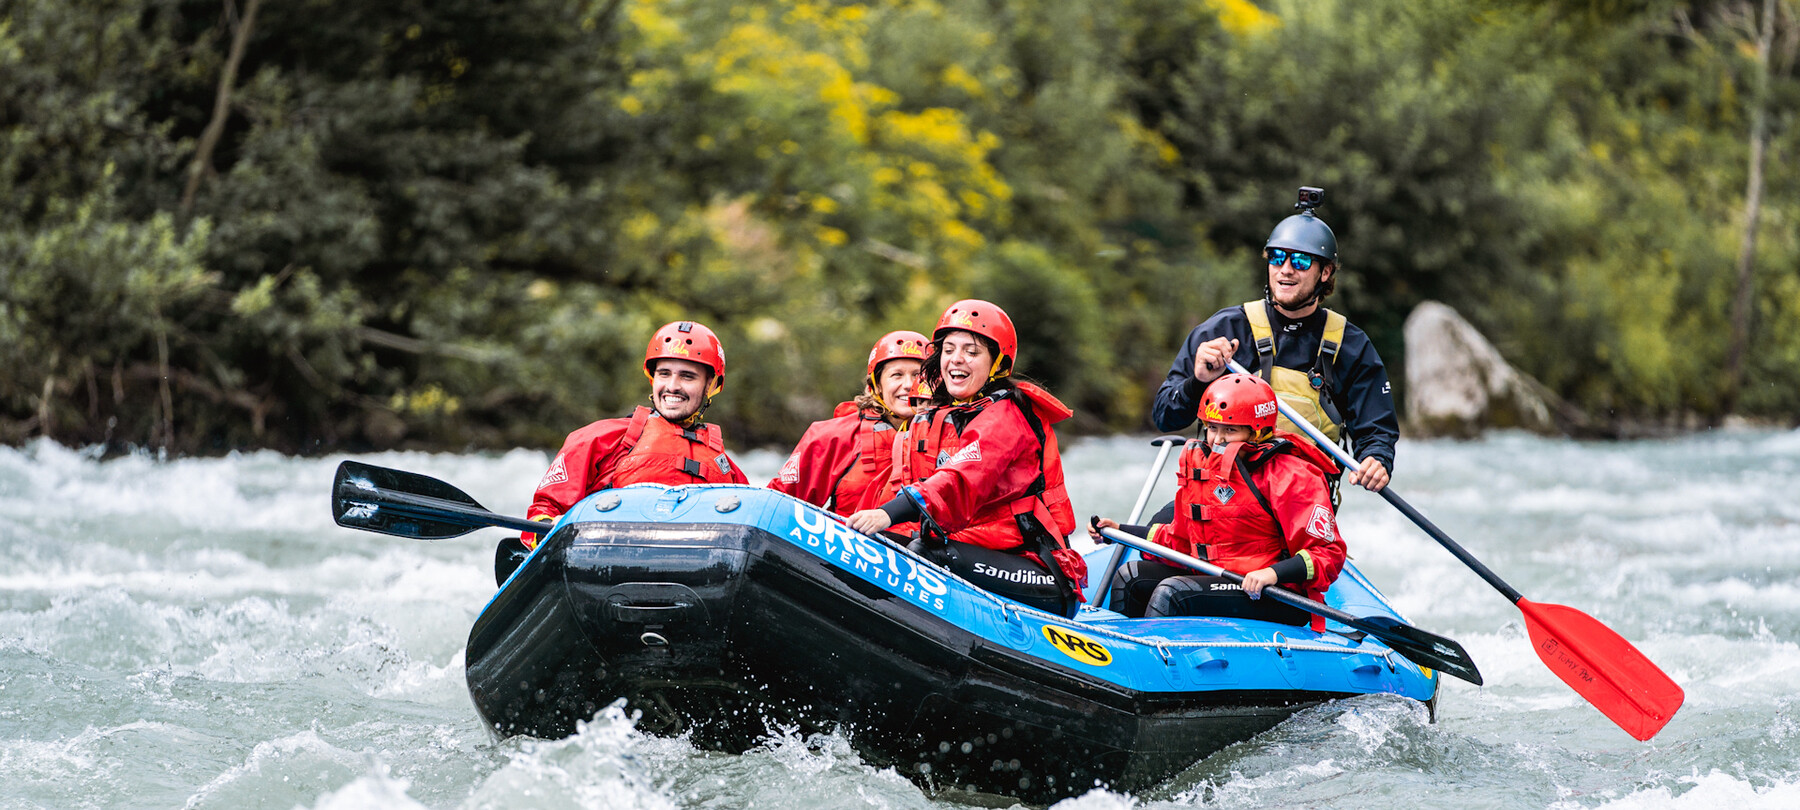 Go rafting in the Val di Sole